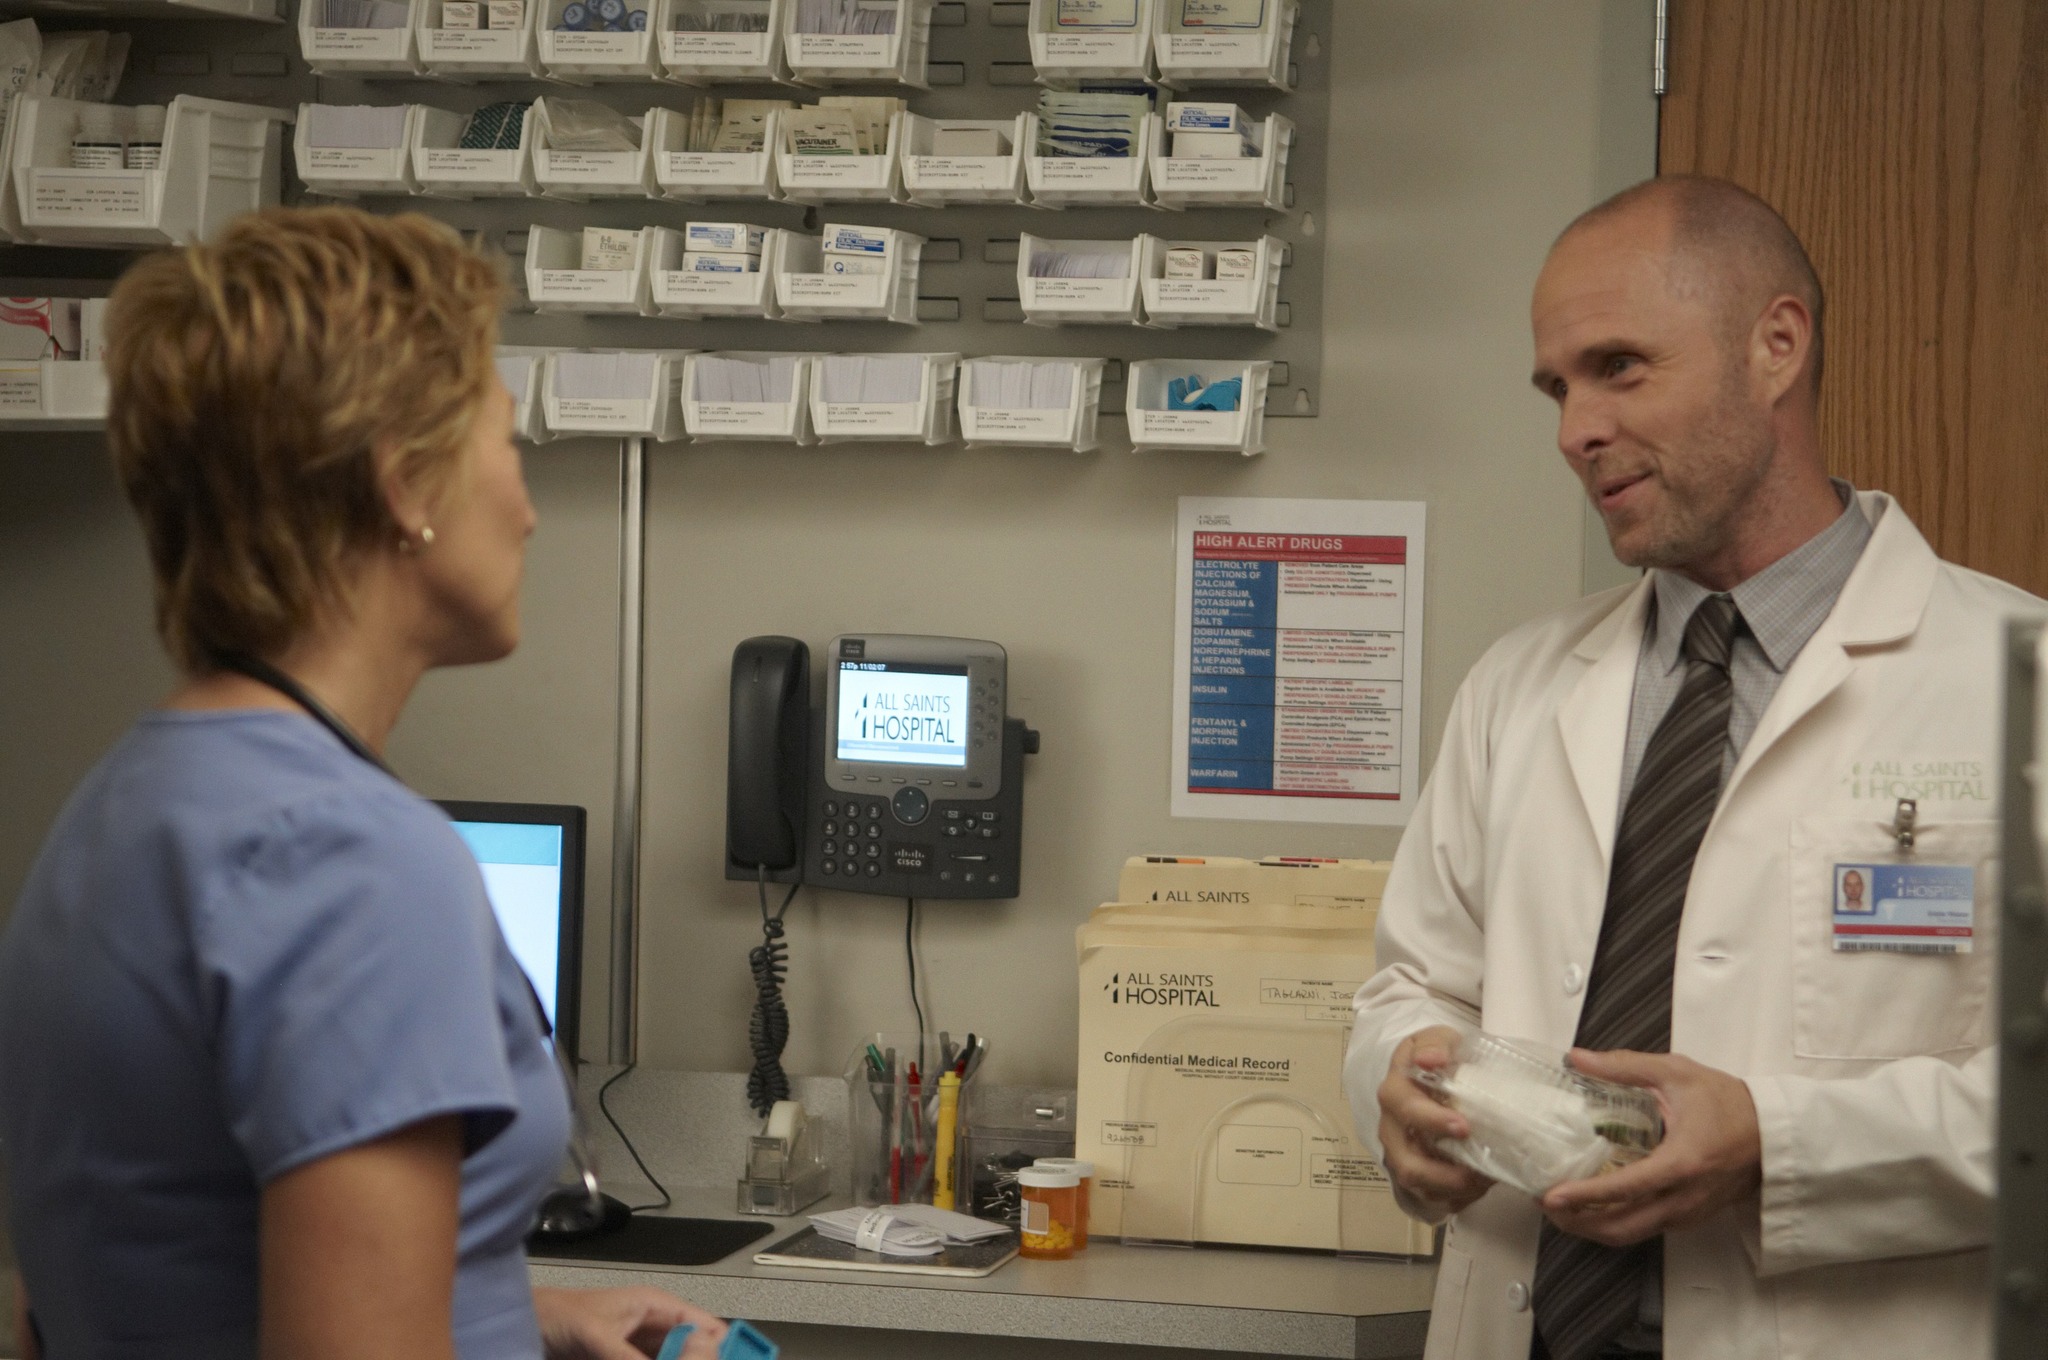 Still of Edie Falco and Paul Schulze in Nurse Jackie (2009)